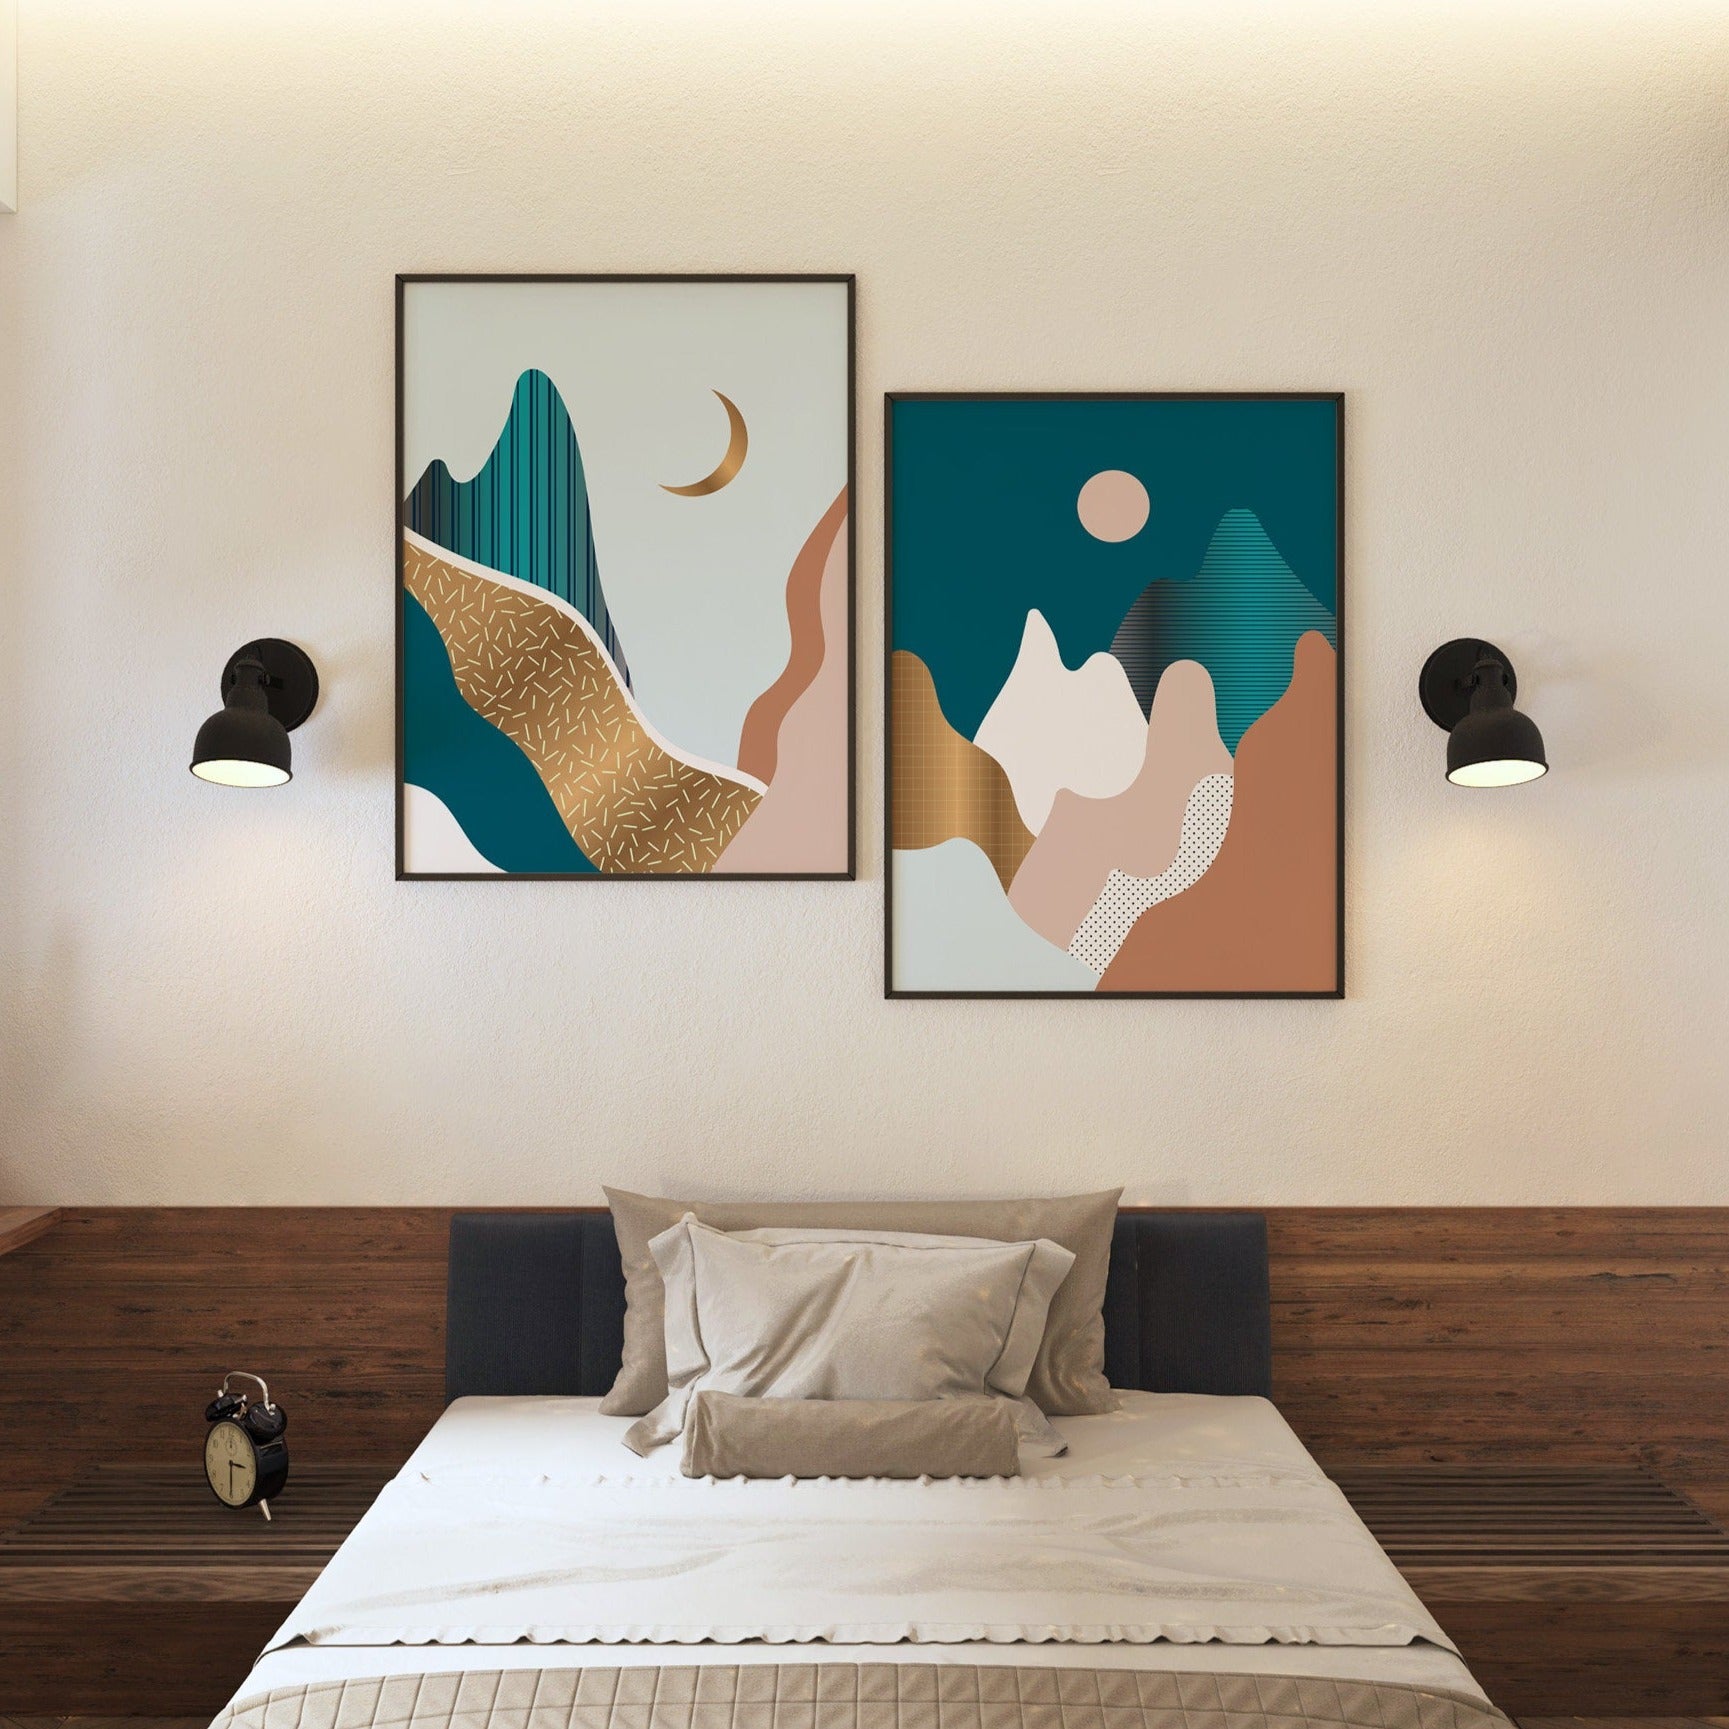 Two mid century graphical art prints hanging above a bed